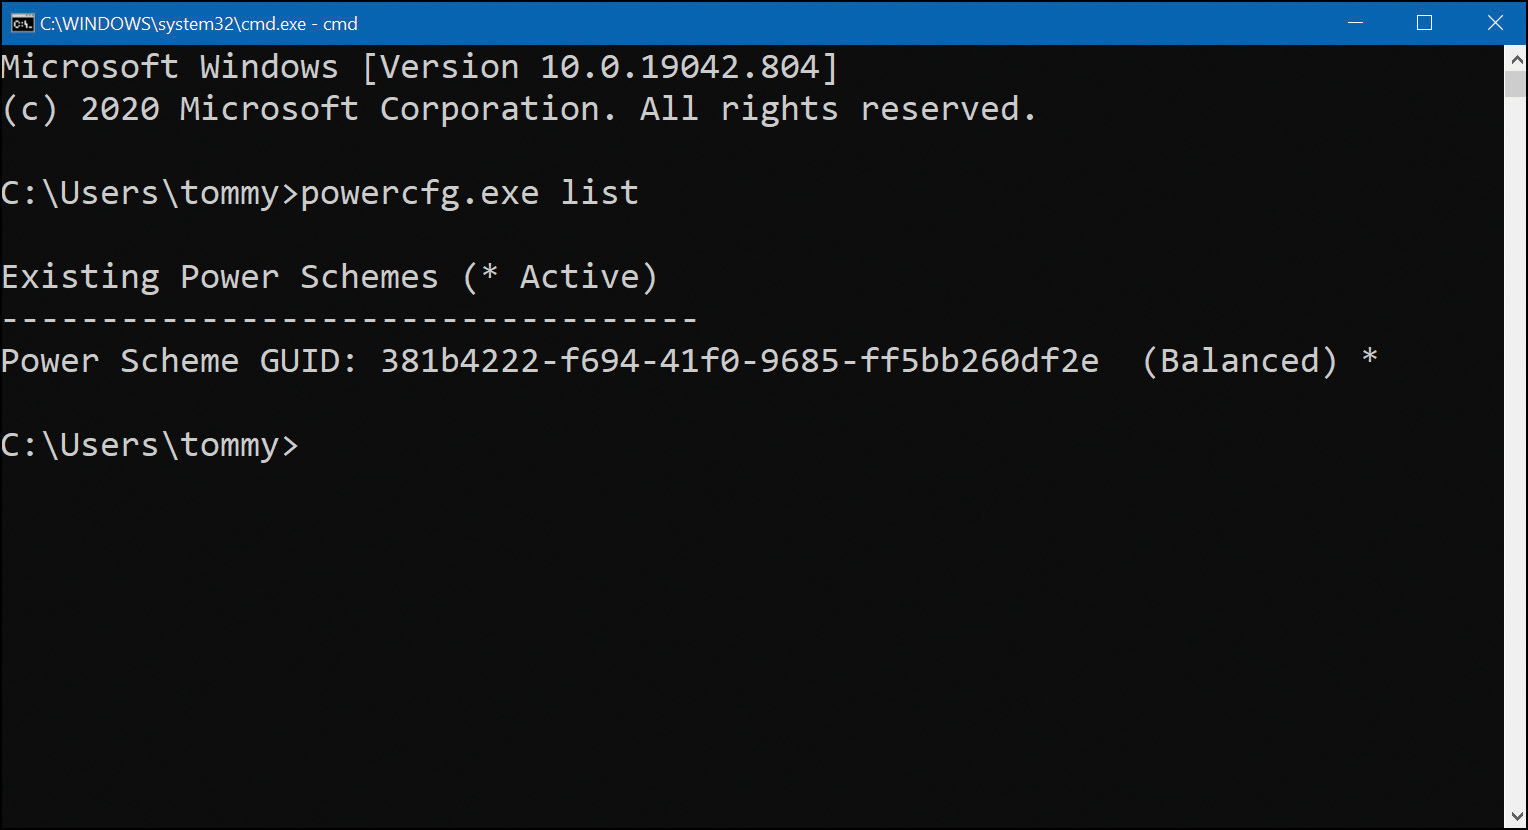 This screenshot shows a Command Prompt window running powercfg.exe. The executable has been ran and the information of Active, Balanced and the Power Scheme GUID (which is a 32 digit hexadecimal number) is shown.